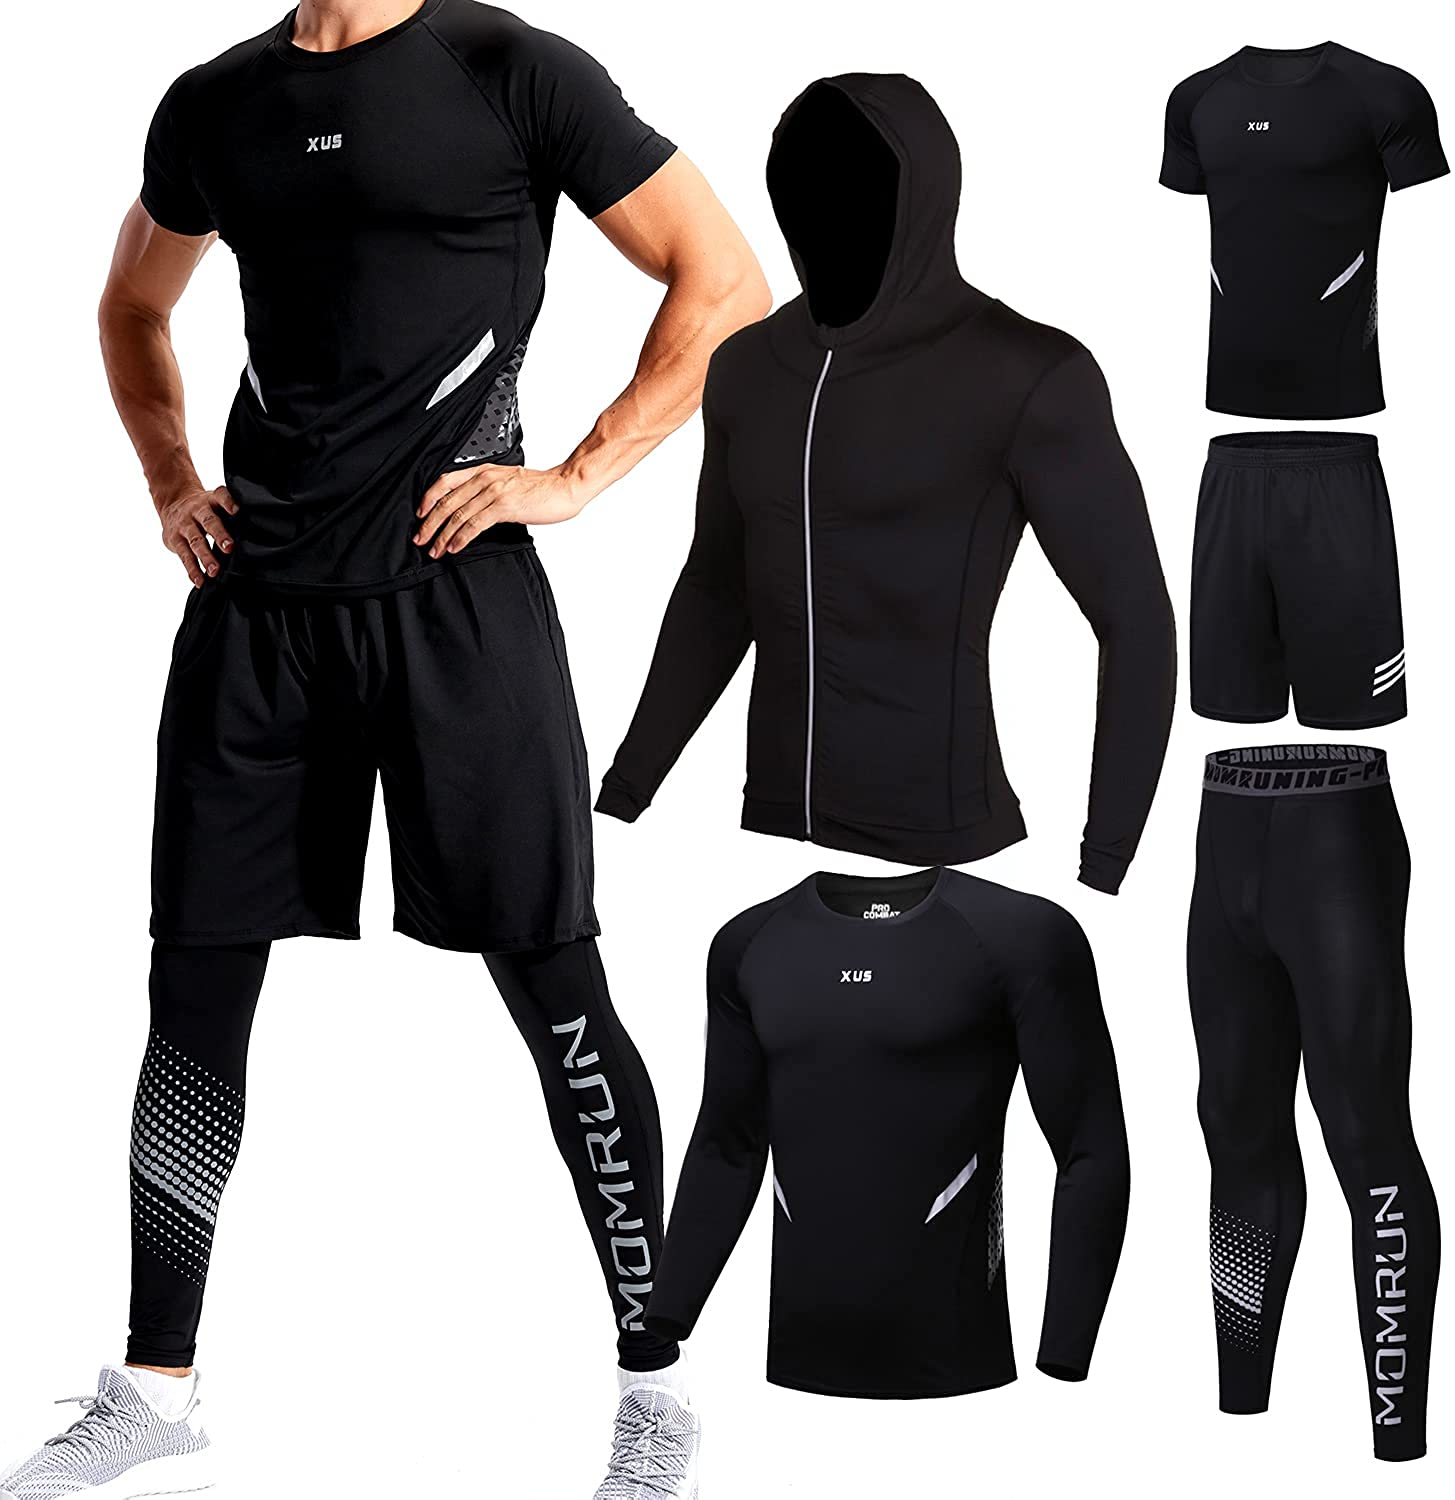 9 Best Workout Clothes and Tools for Travel and Home